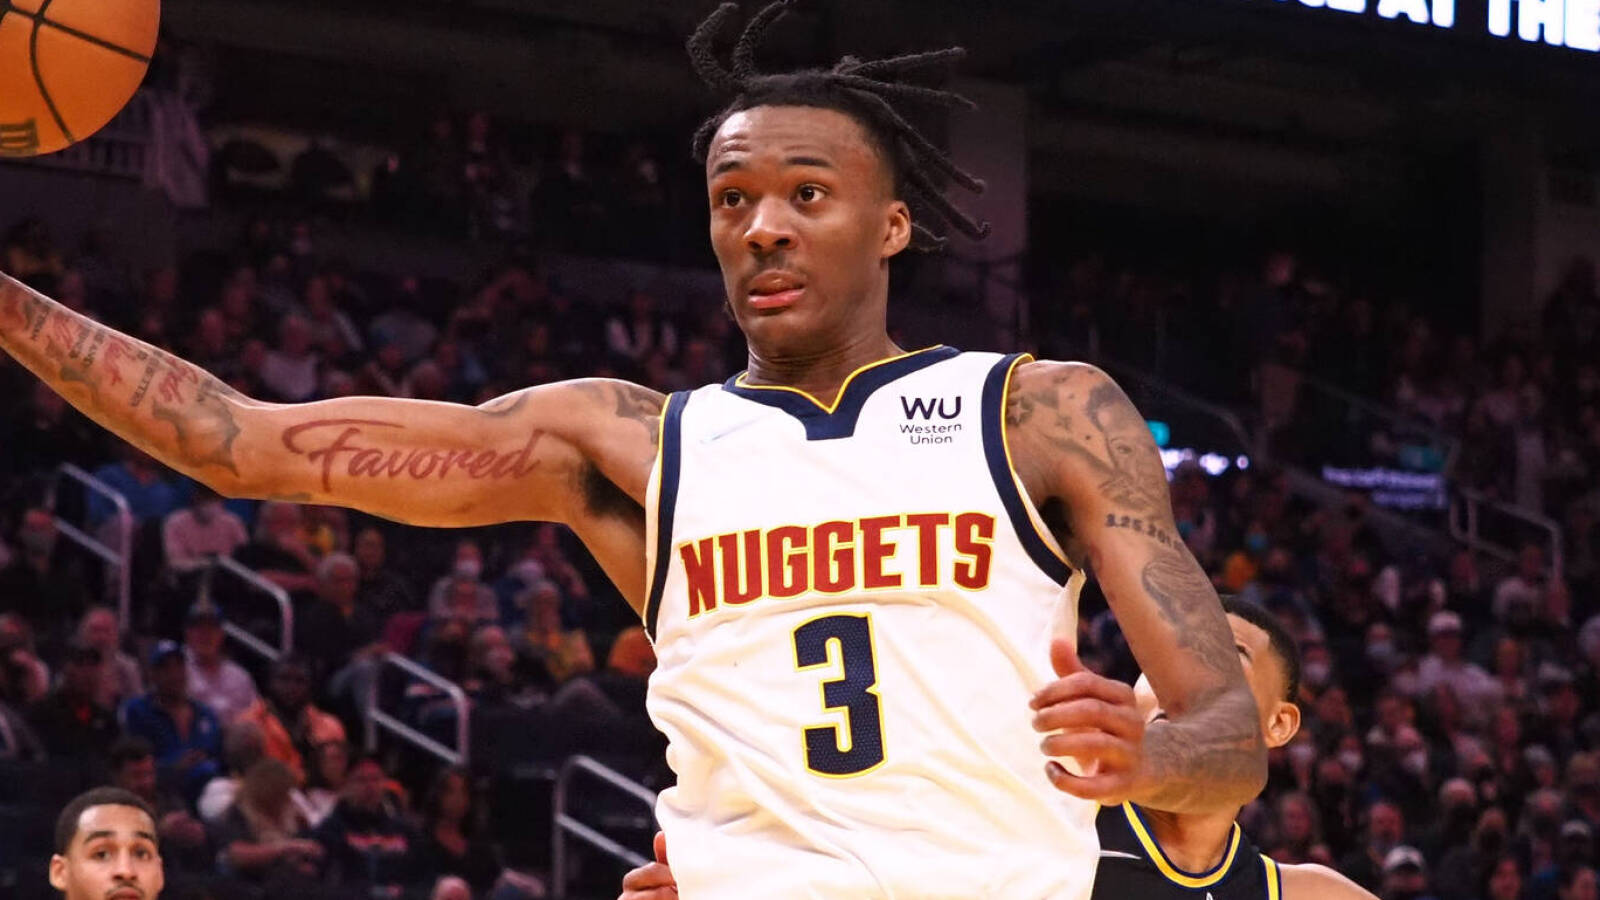 Nuggets' Bones Hyland replaces Kings' Davion Mitchell in Rising Stars game